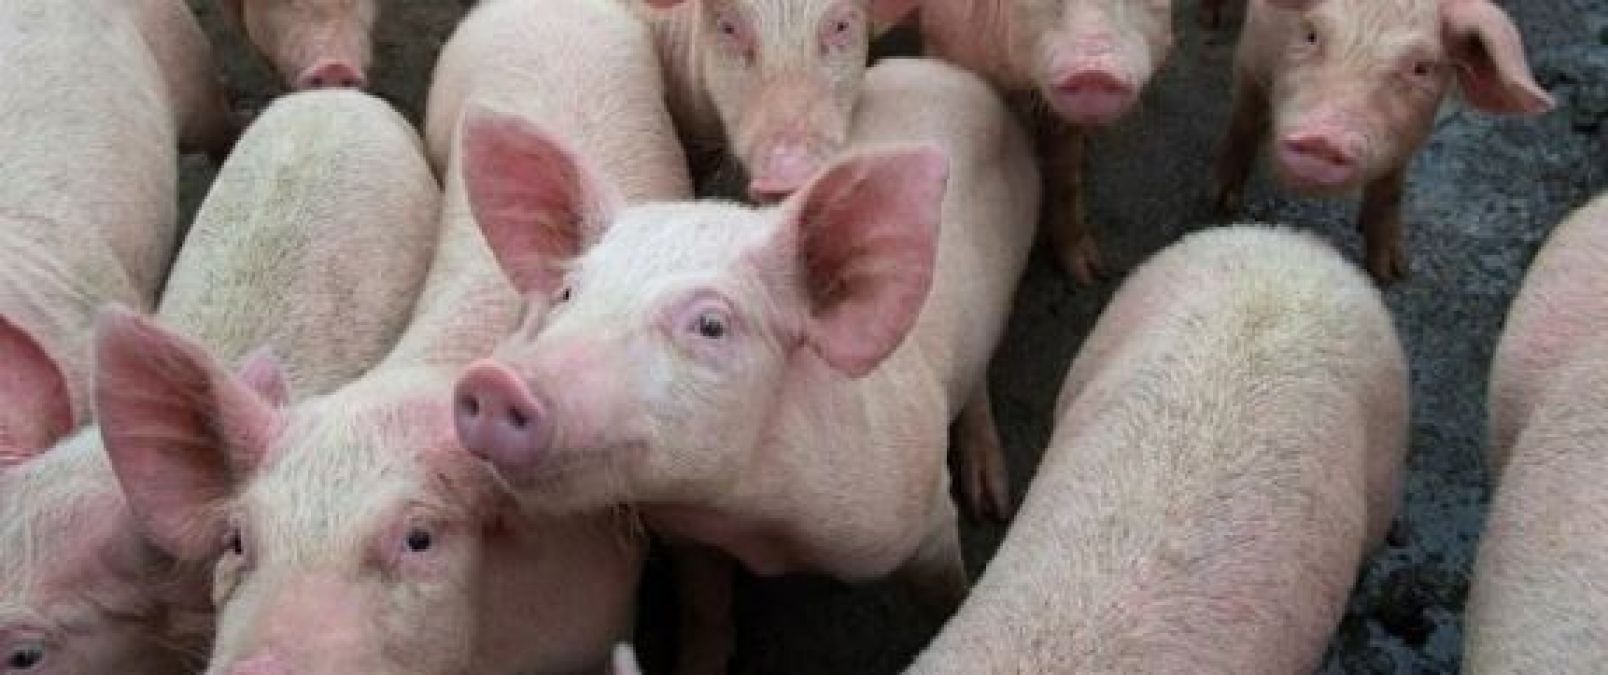 African swine fever came after Lumpy virus, more than 100 pigs died